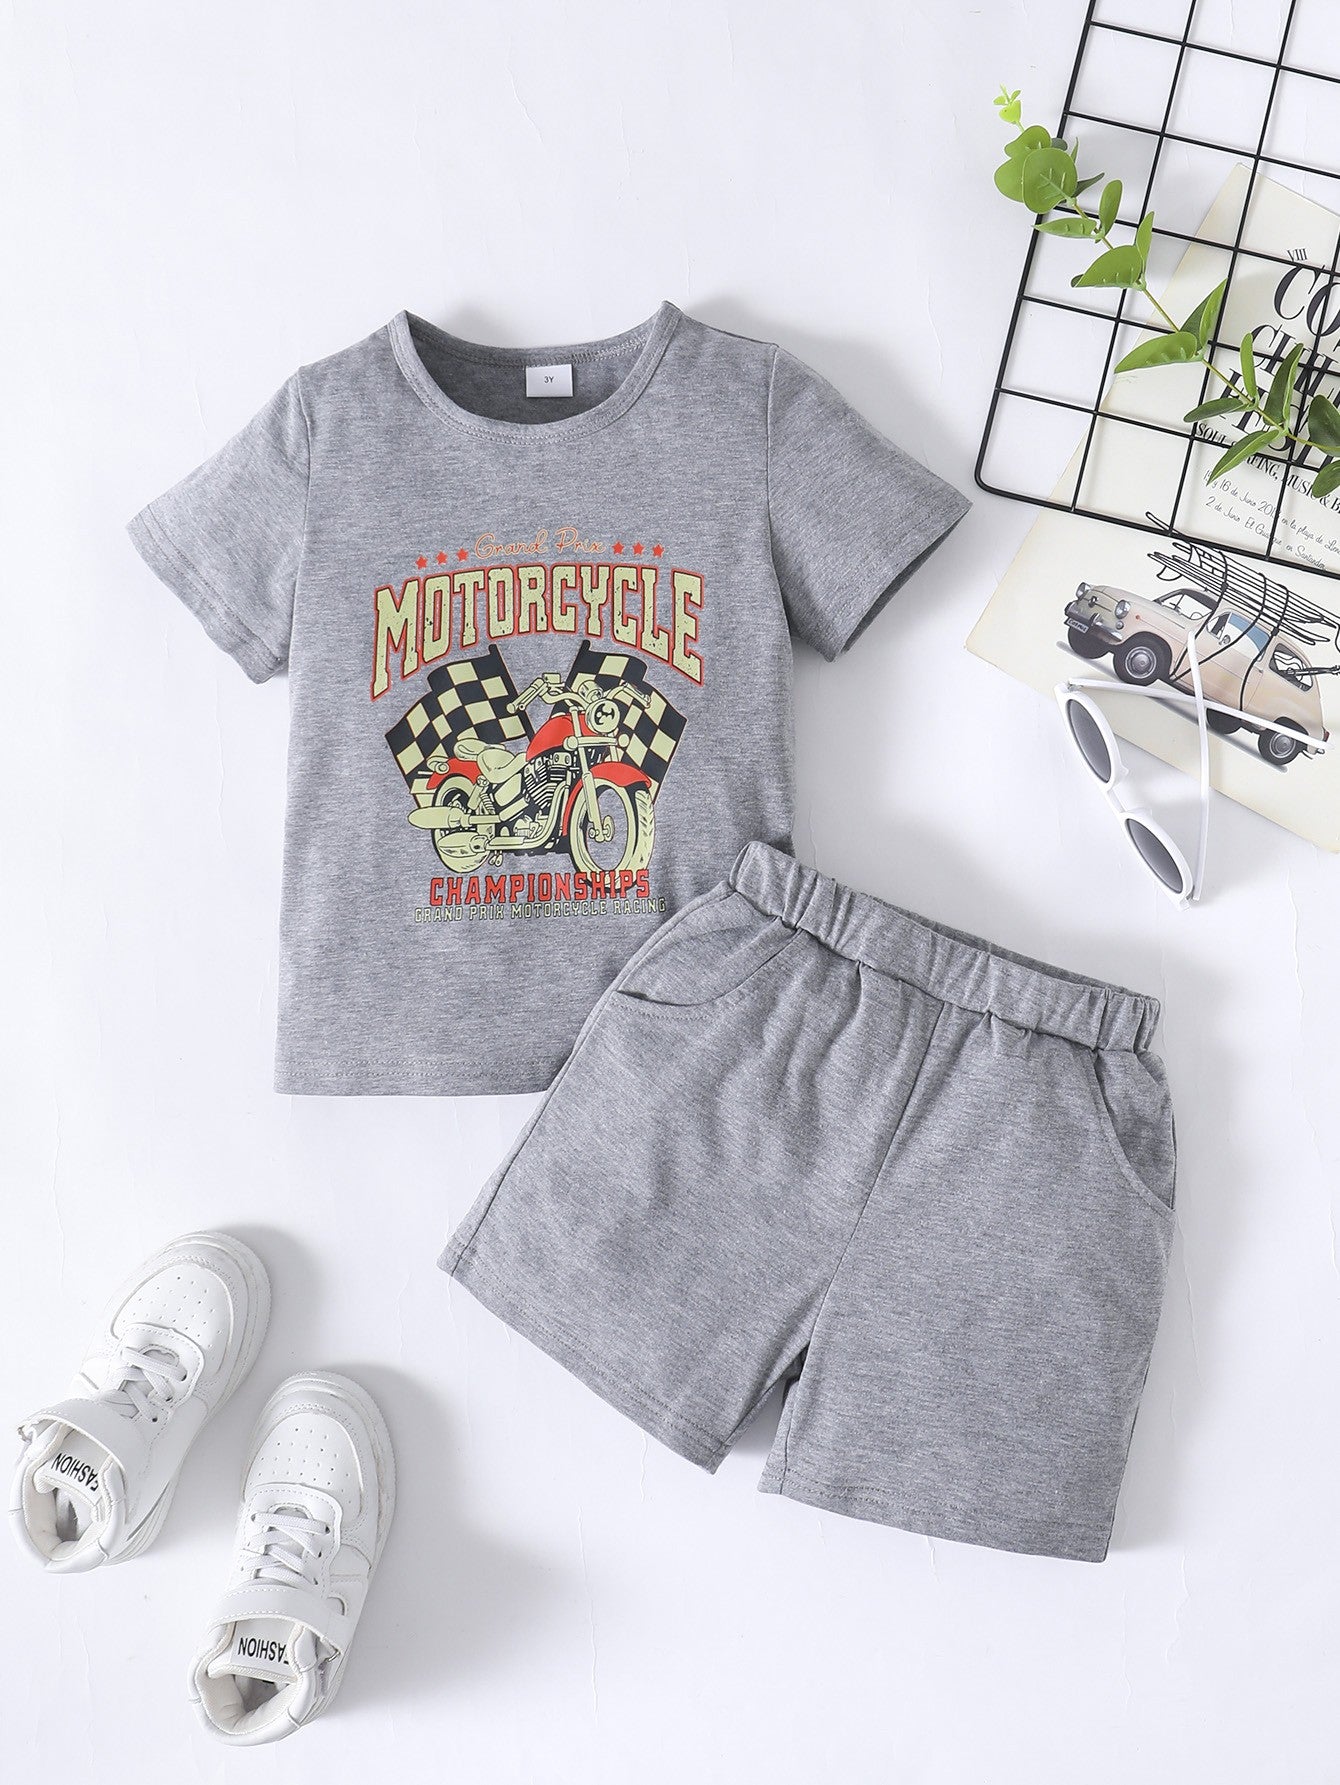 Boys CHAMPIONSHIPS Graphic Tee and Shorts Set - DromedarShop.com Online Boutique